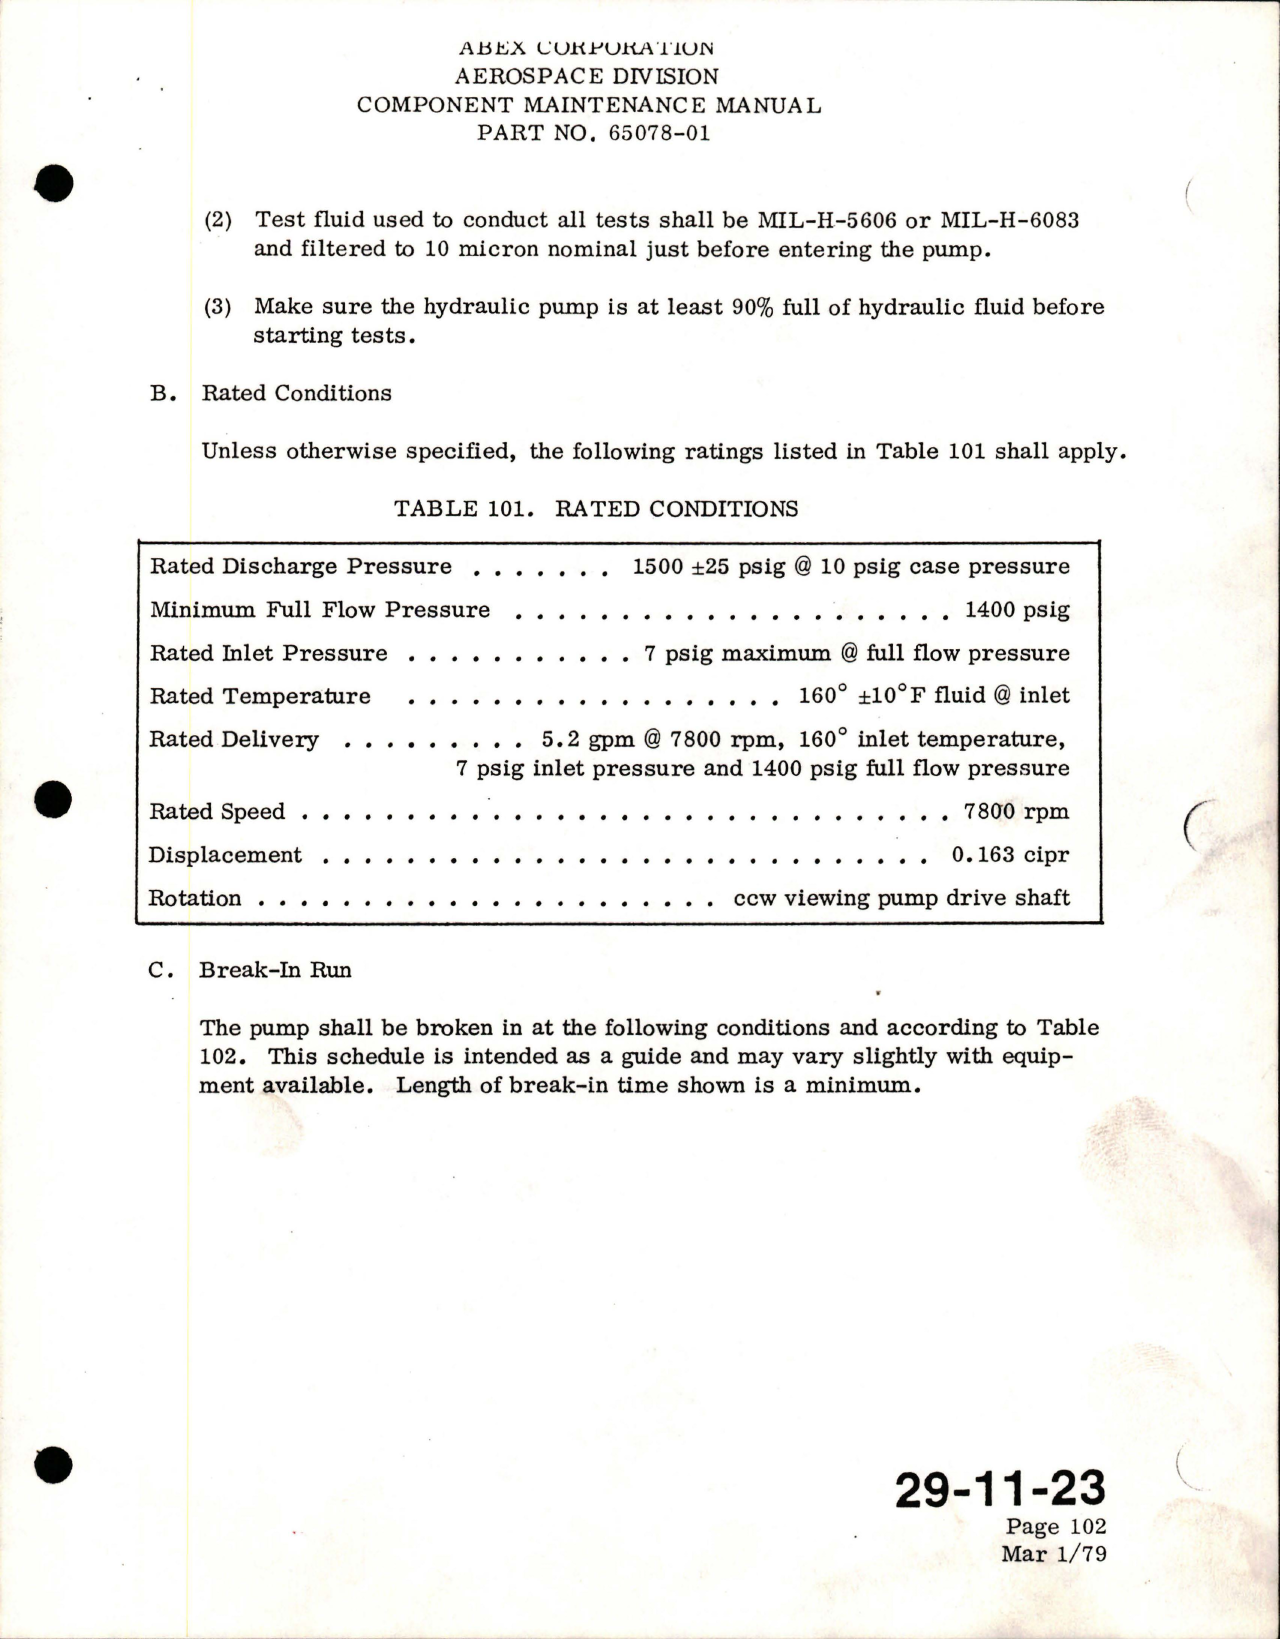 Sample page 9 from AirCorps Library document: Maintenance Manual with Illustrated Parts List for Variable Delivery Hydraulic Pump - Model AP09V-8-01 - Part 65078-01